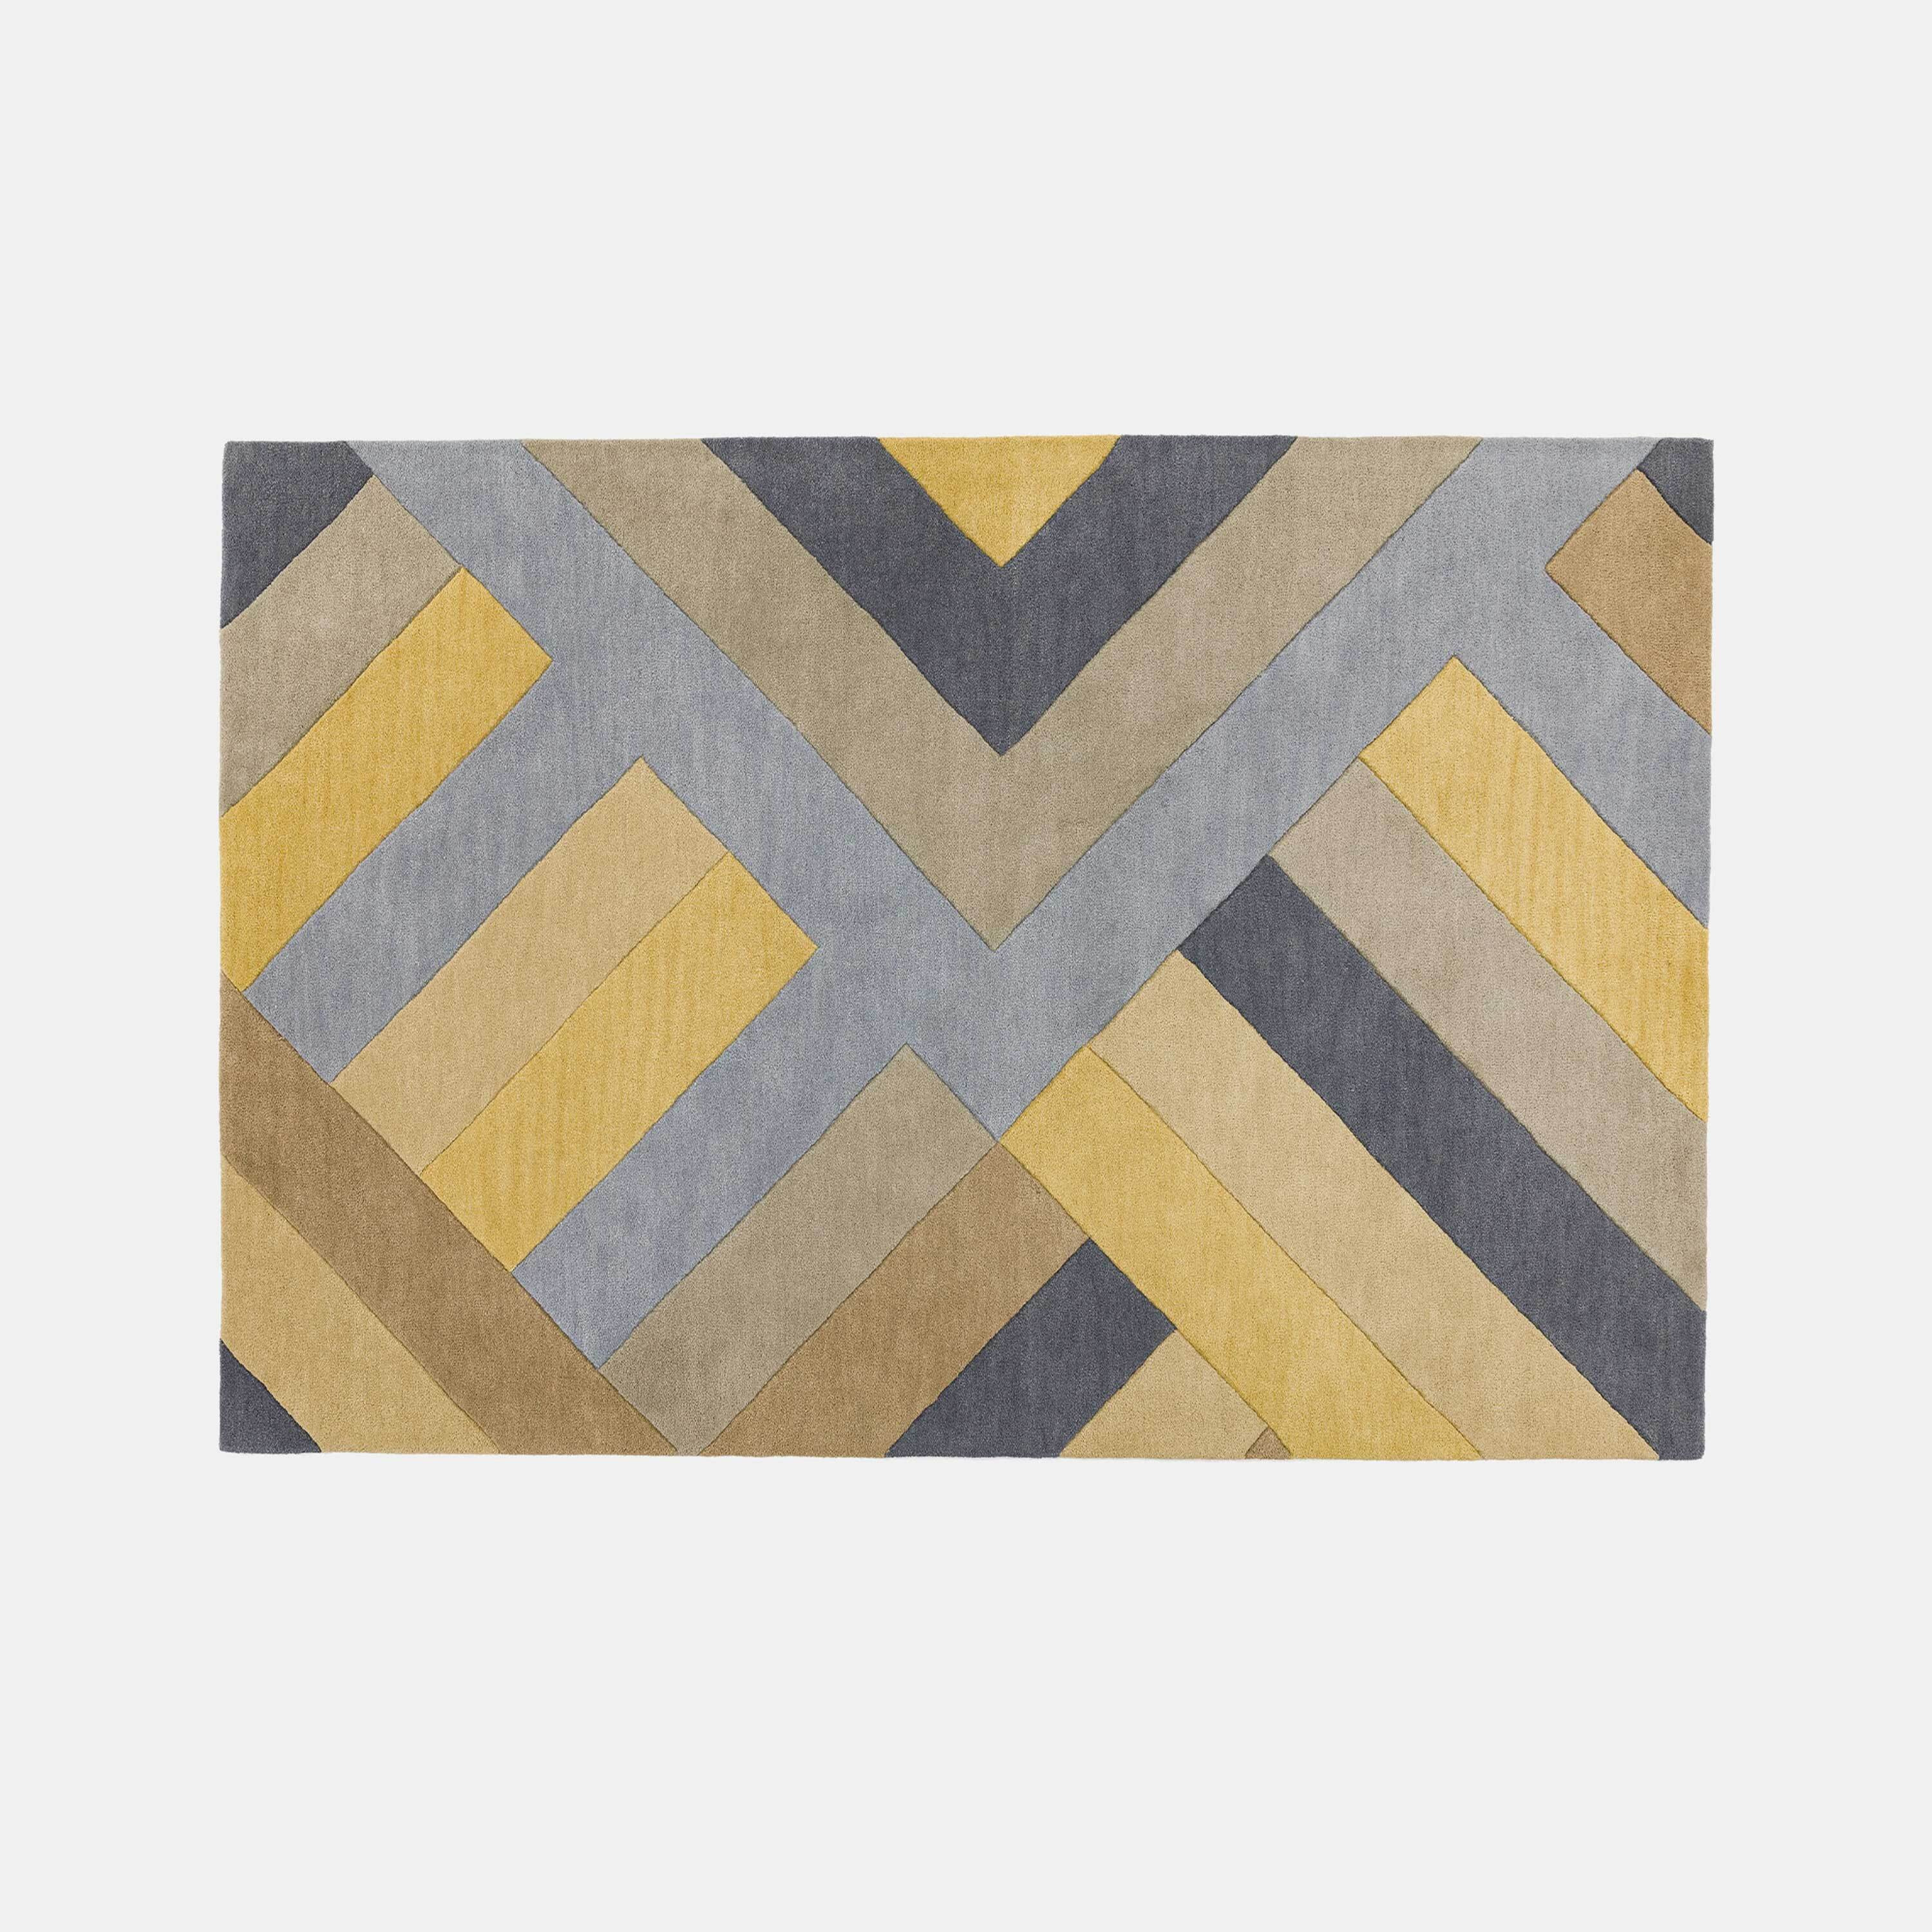 Wool rug - modern rug with striped rug design - ZIGGY by housecosy - image 1